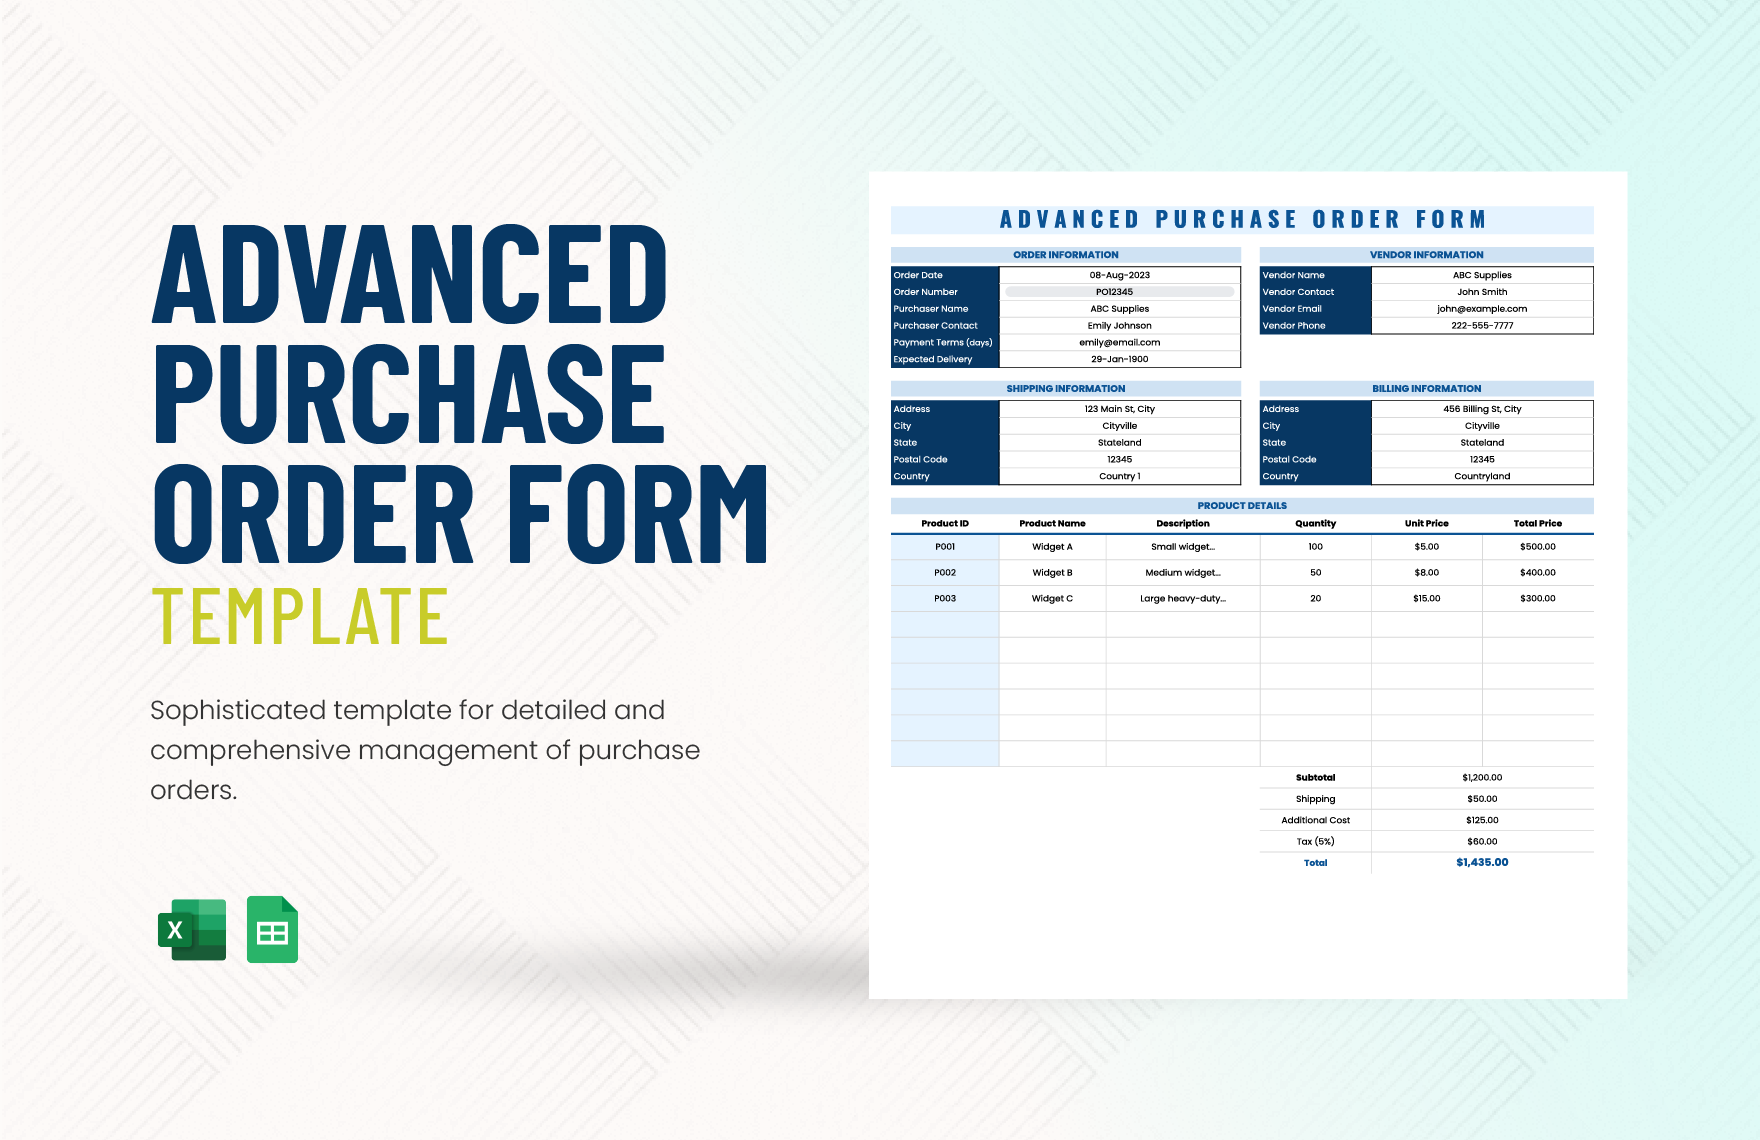 Advanced Purchase Order Form Template